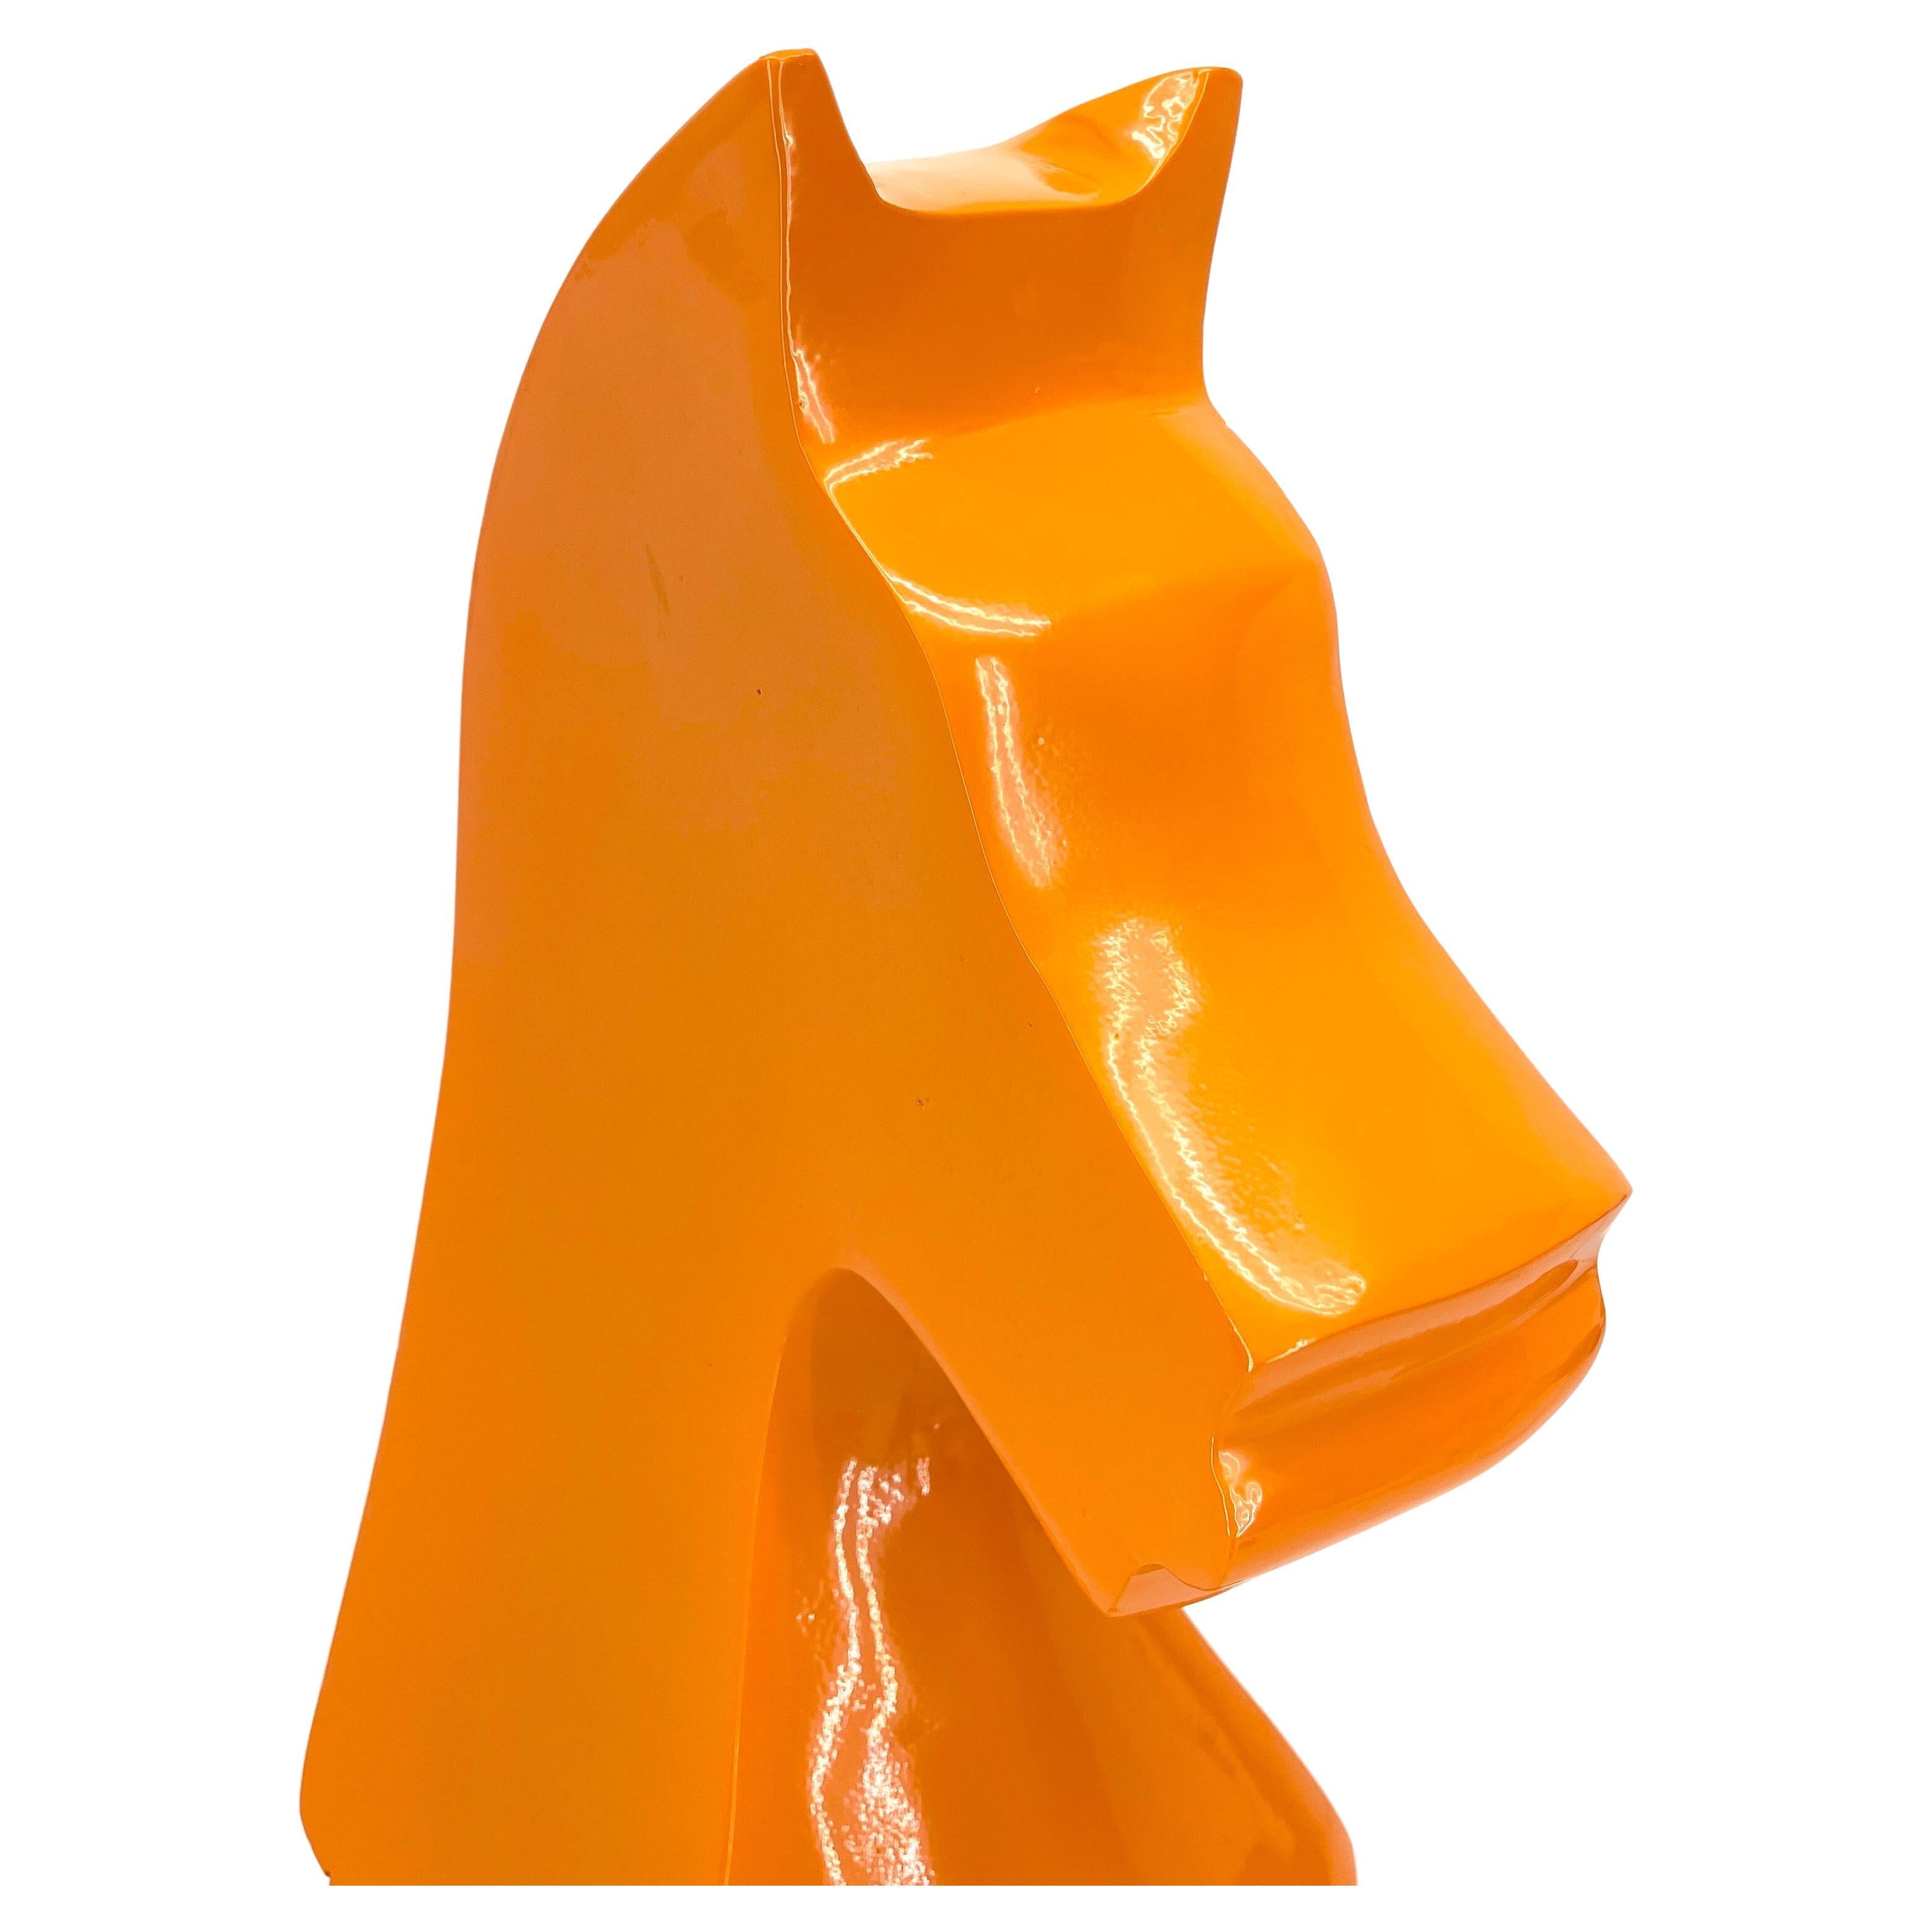 Large Oversized Chess Knight Piece Statue, Orange Powder-Coated  For Sale 4